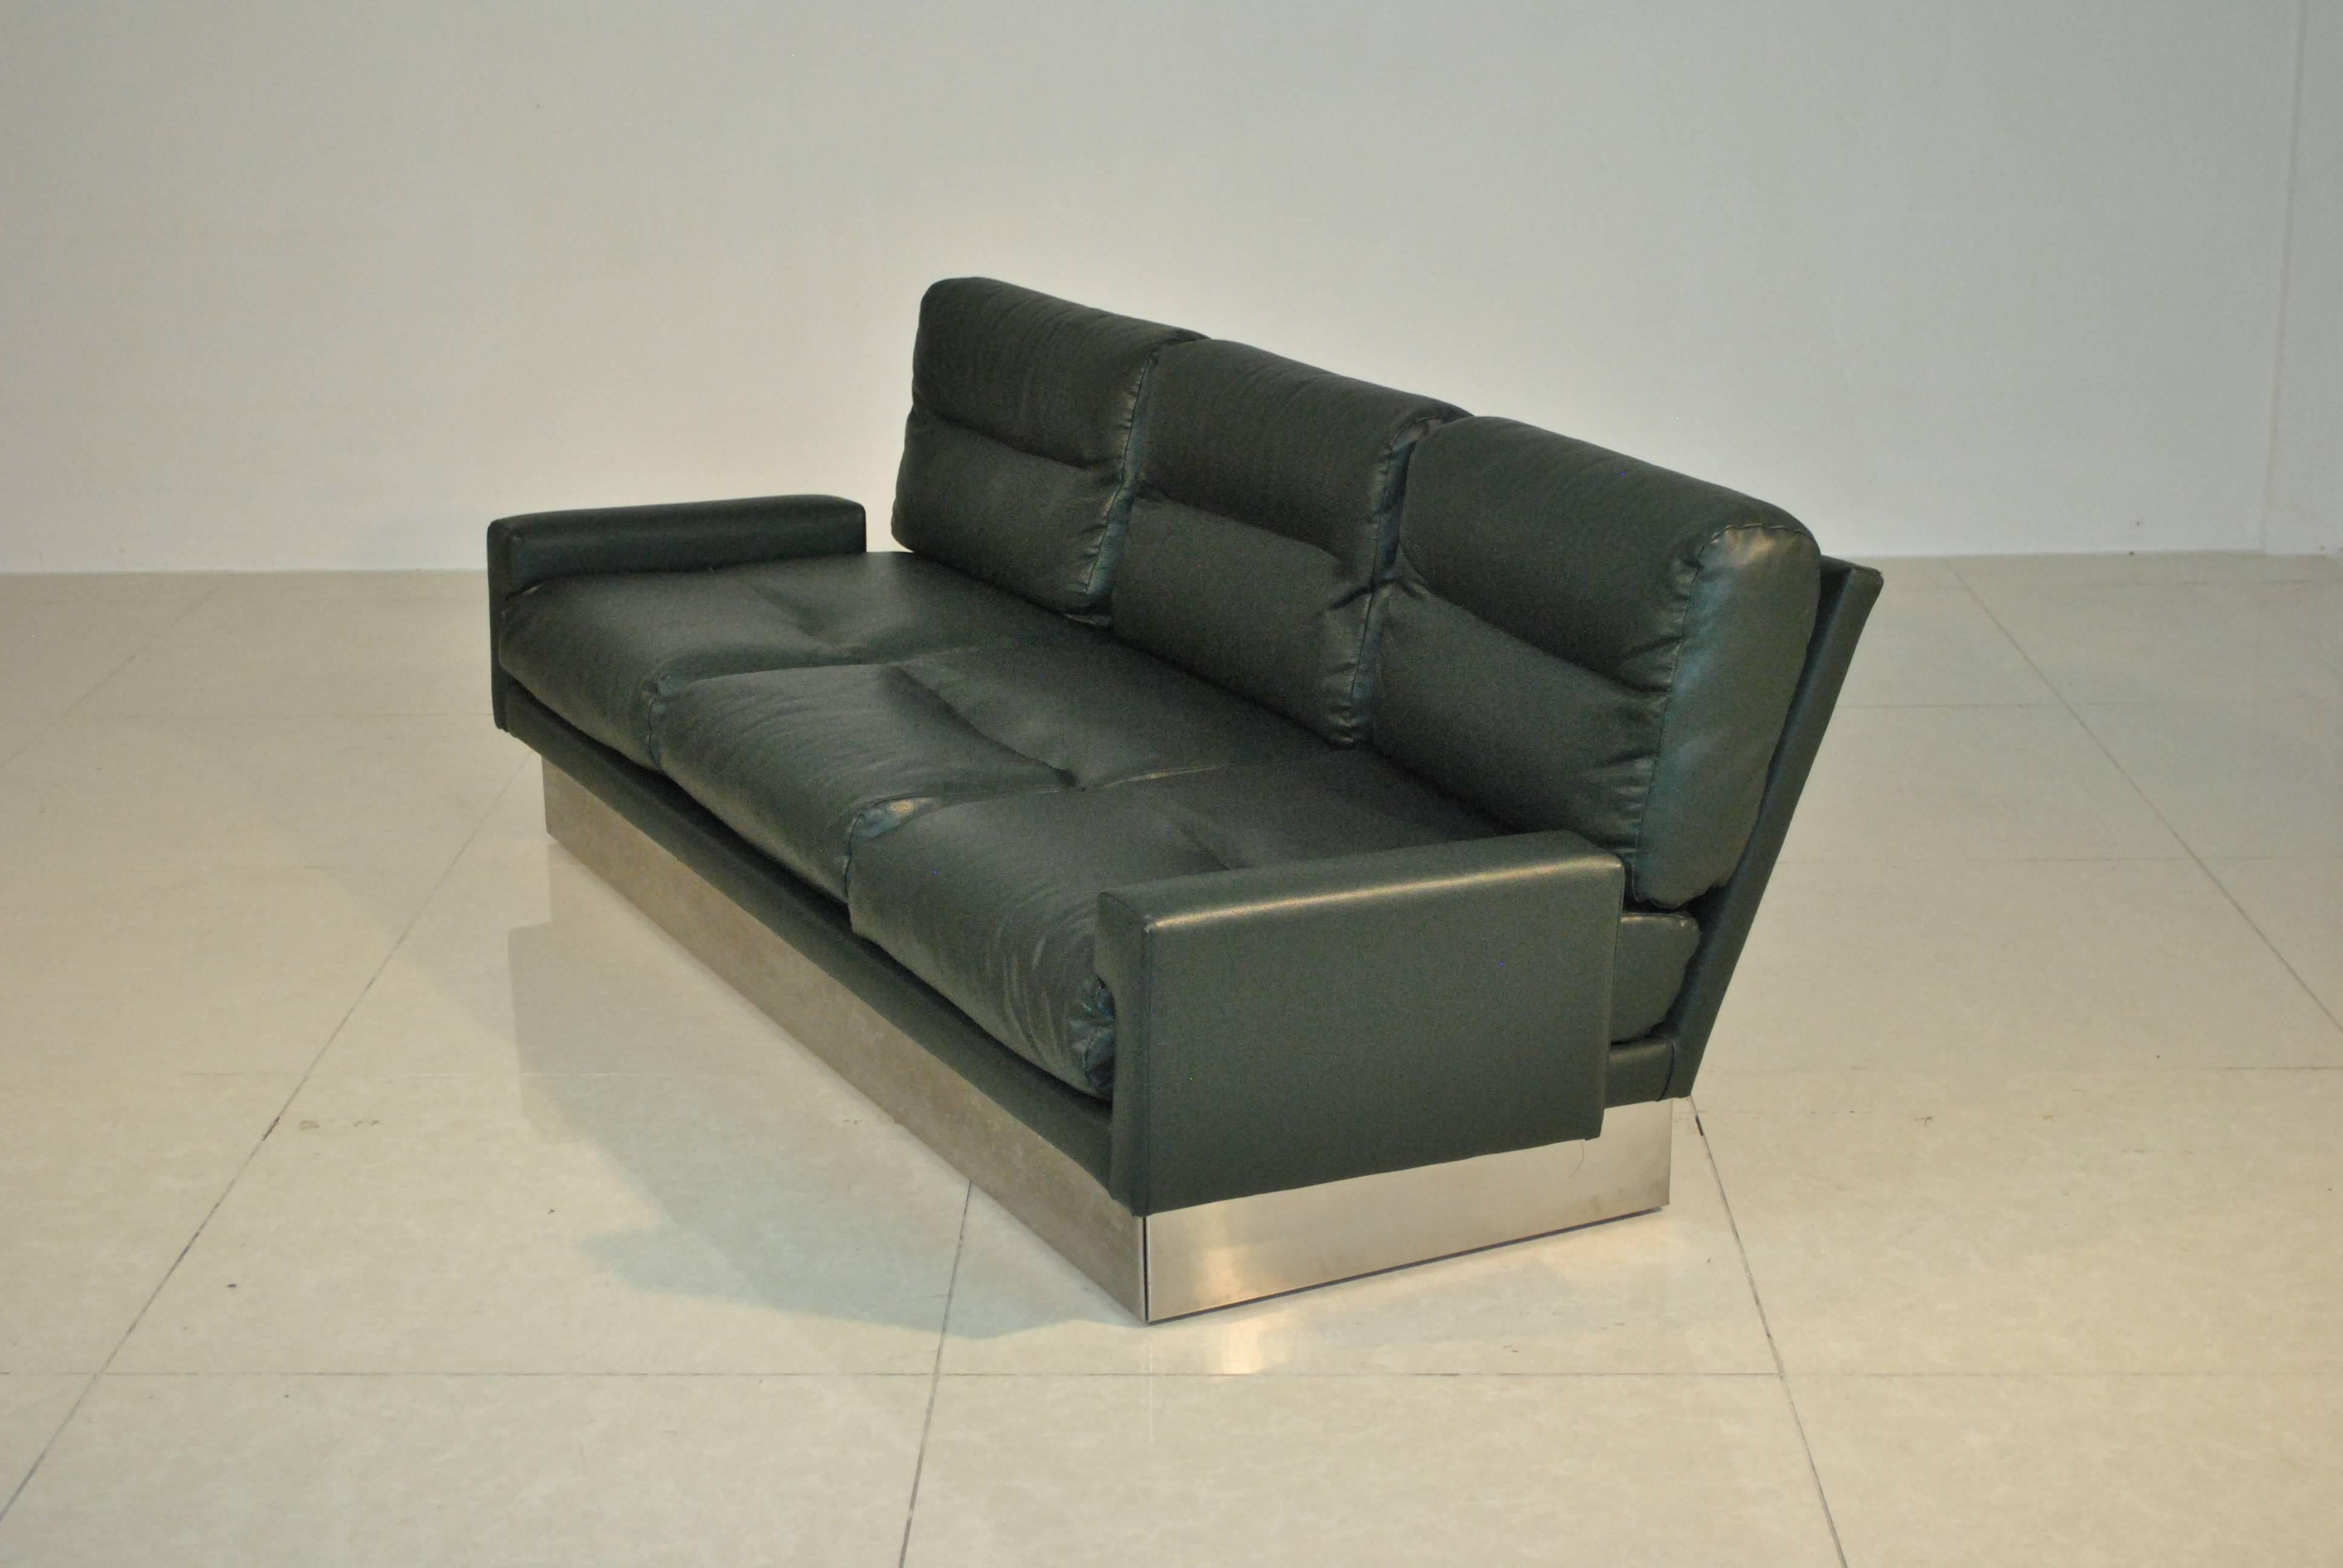 Streamlined Moderne Rare Jacques Charpentier Leather Sofas, France, 1970s For Sale